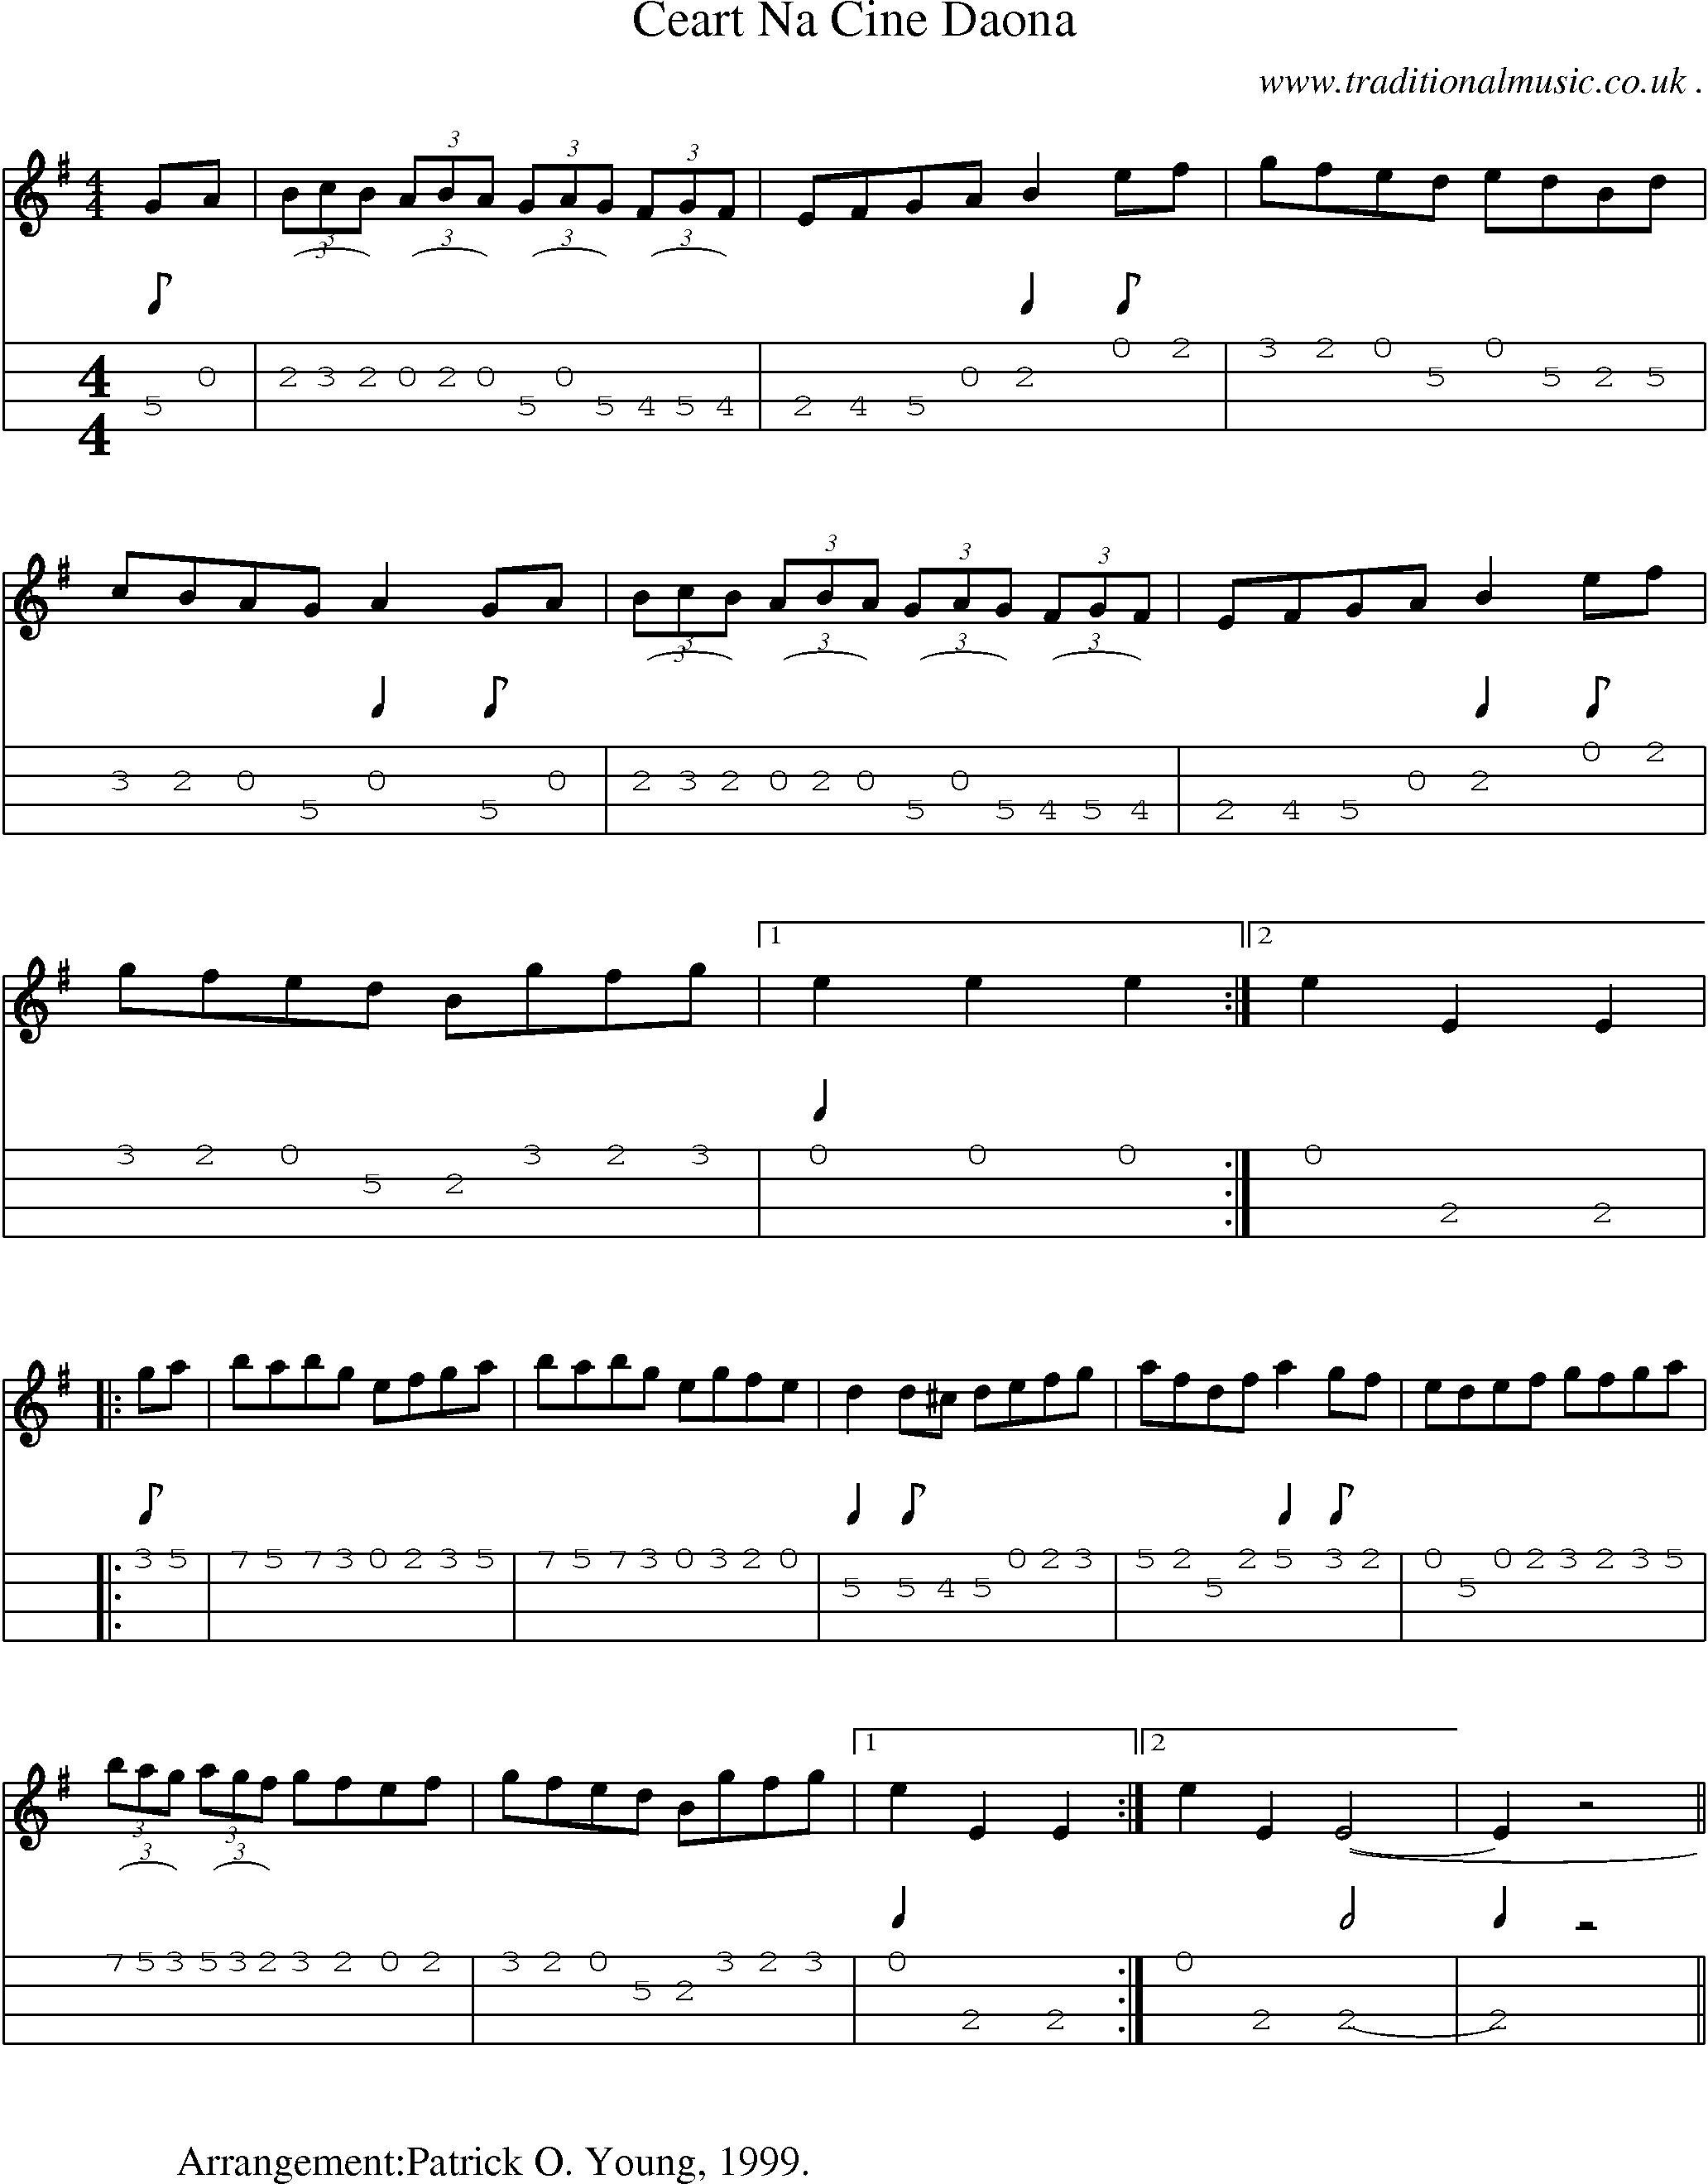 Sheet-Music and Mandolin Tabs for Ceart Na Cine Daona